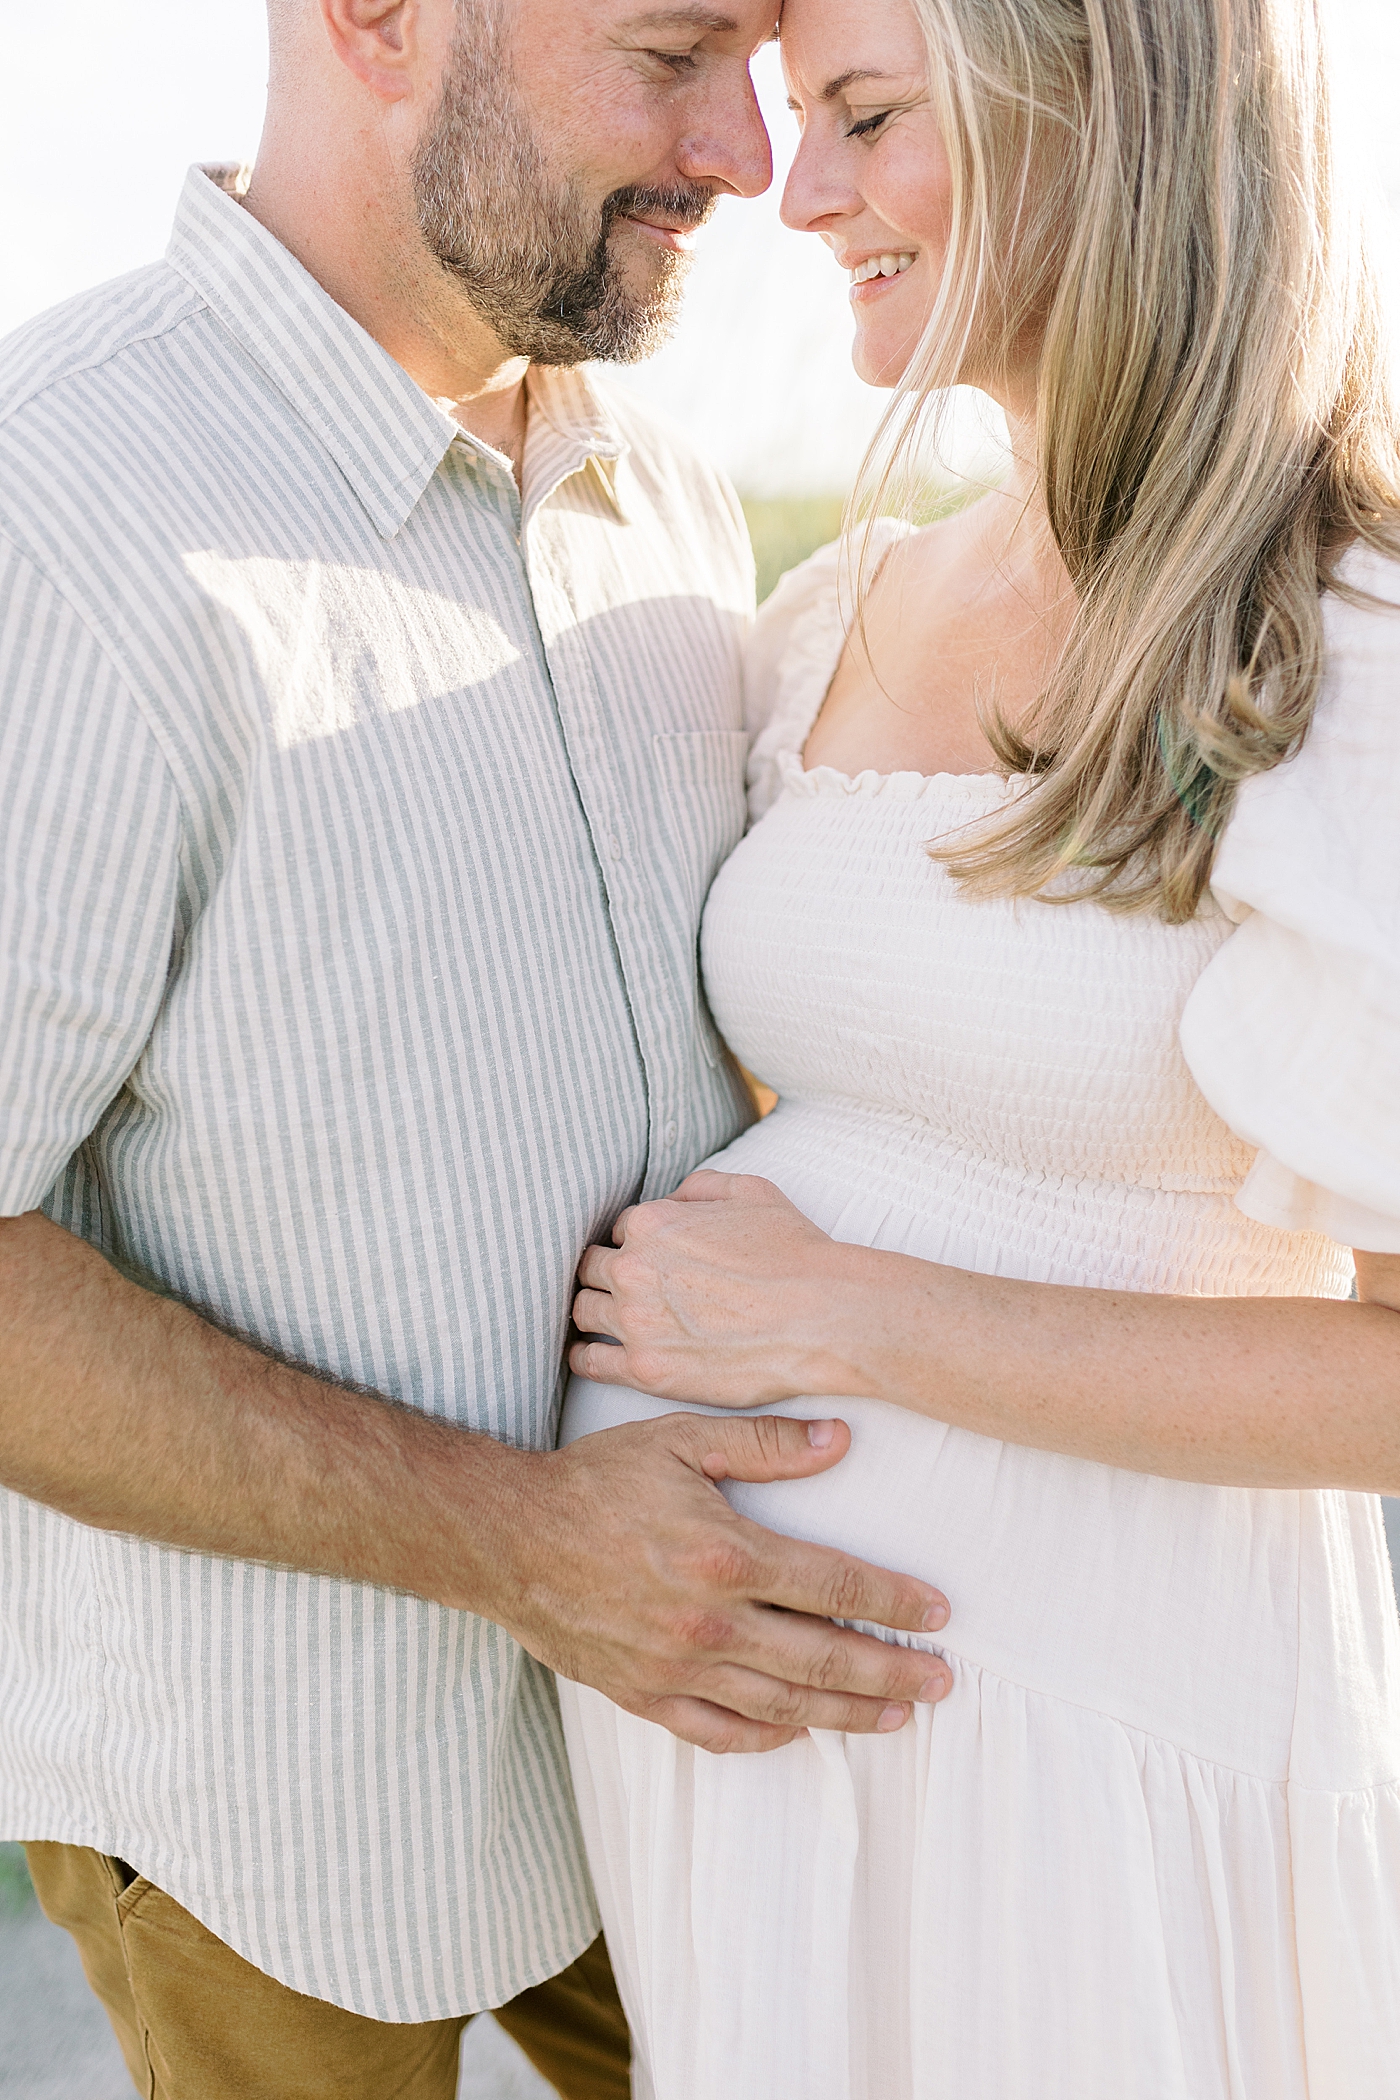 Detail of mom and dad snuggling during their Maternity Session at Folly Beach | Image by Caitlyn Motycka